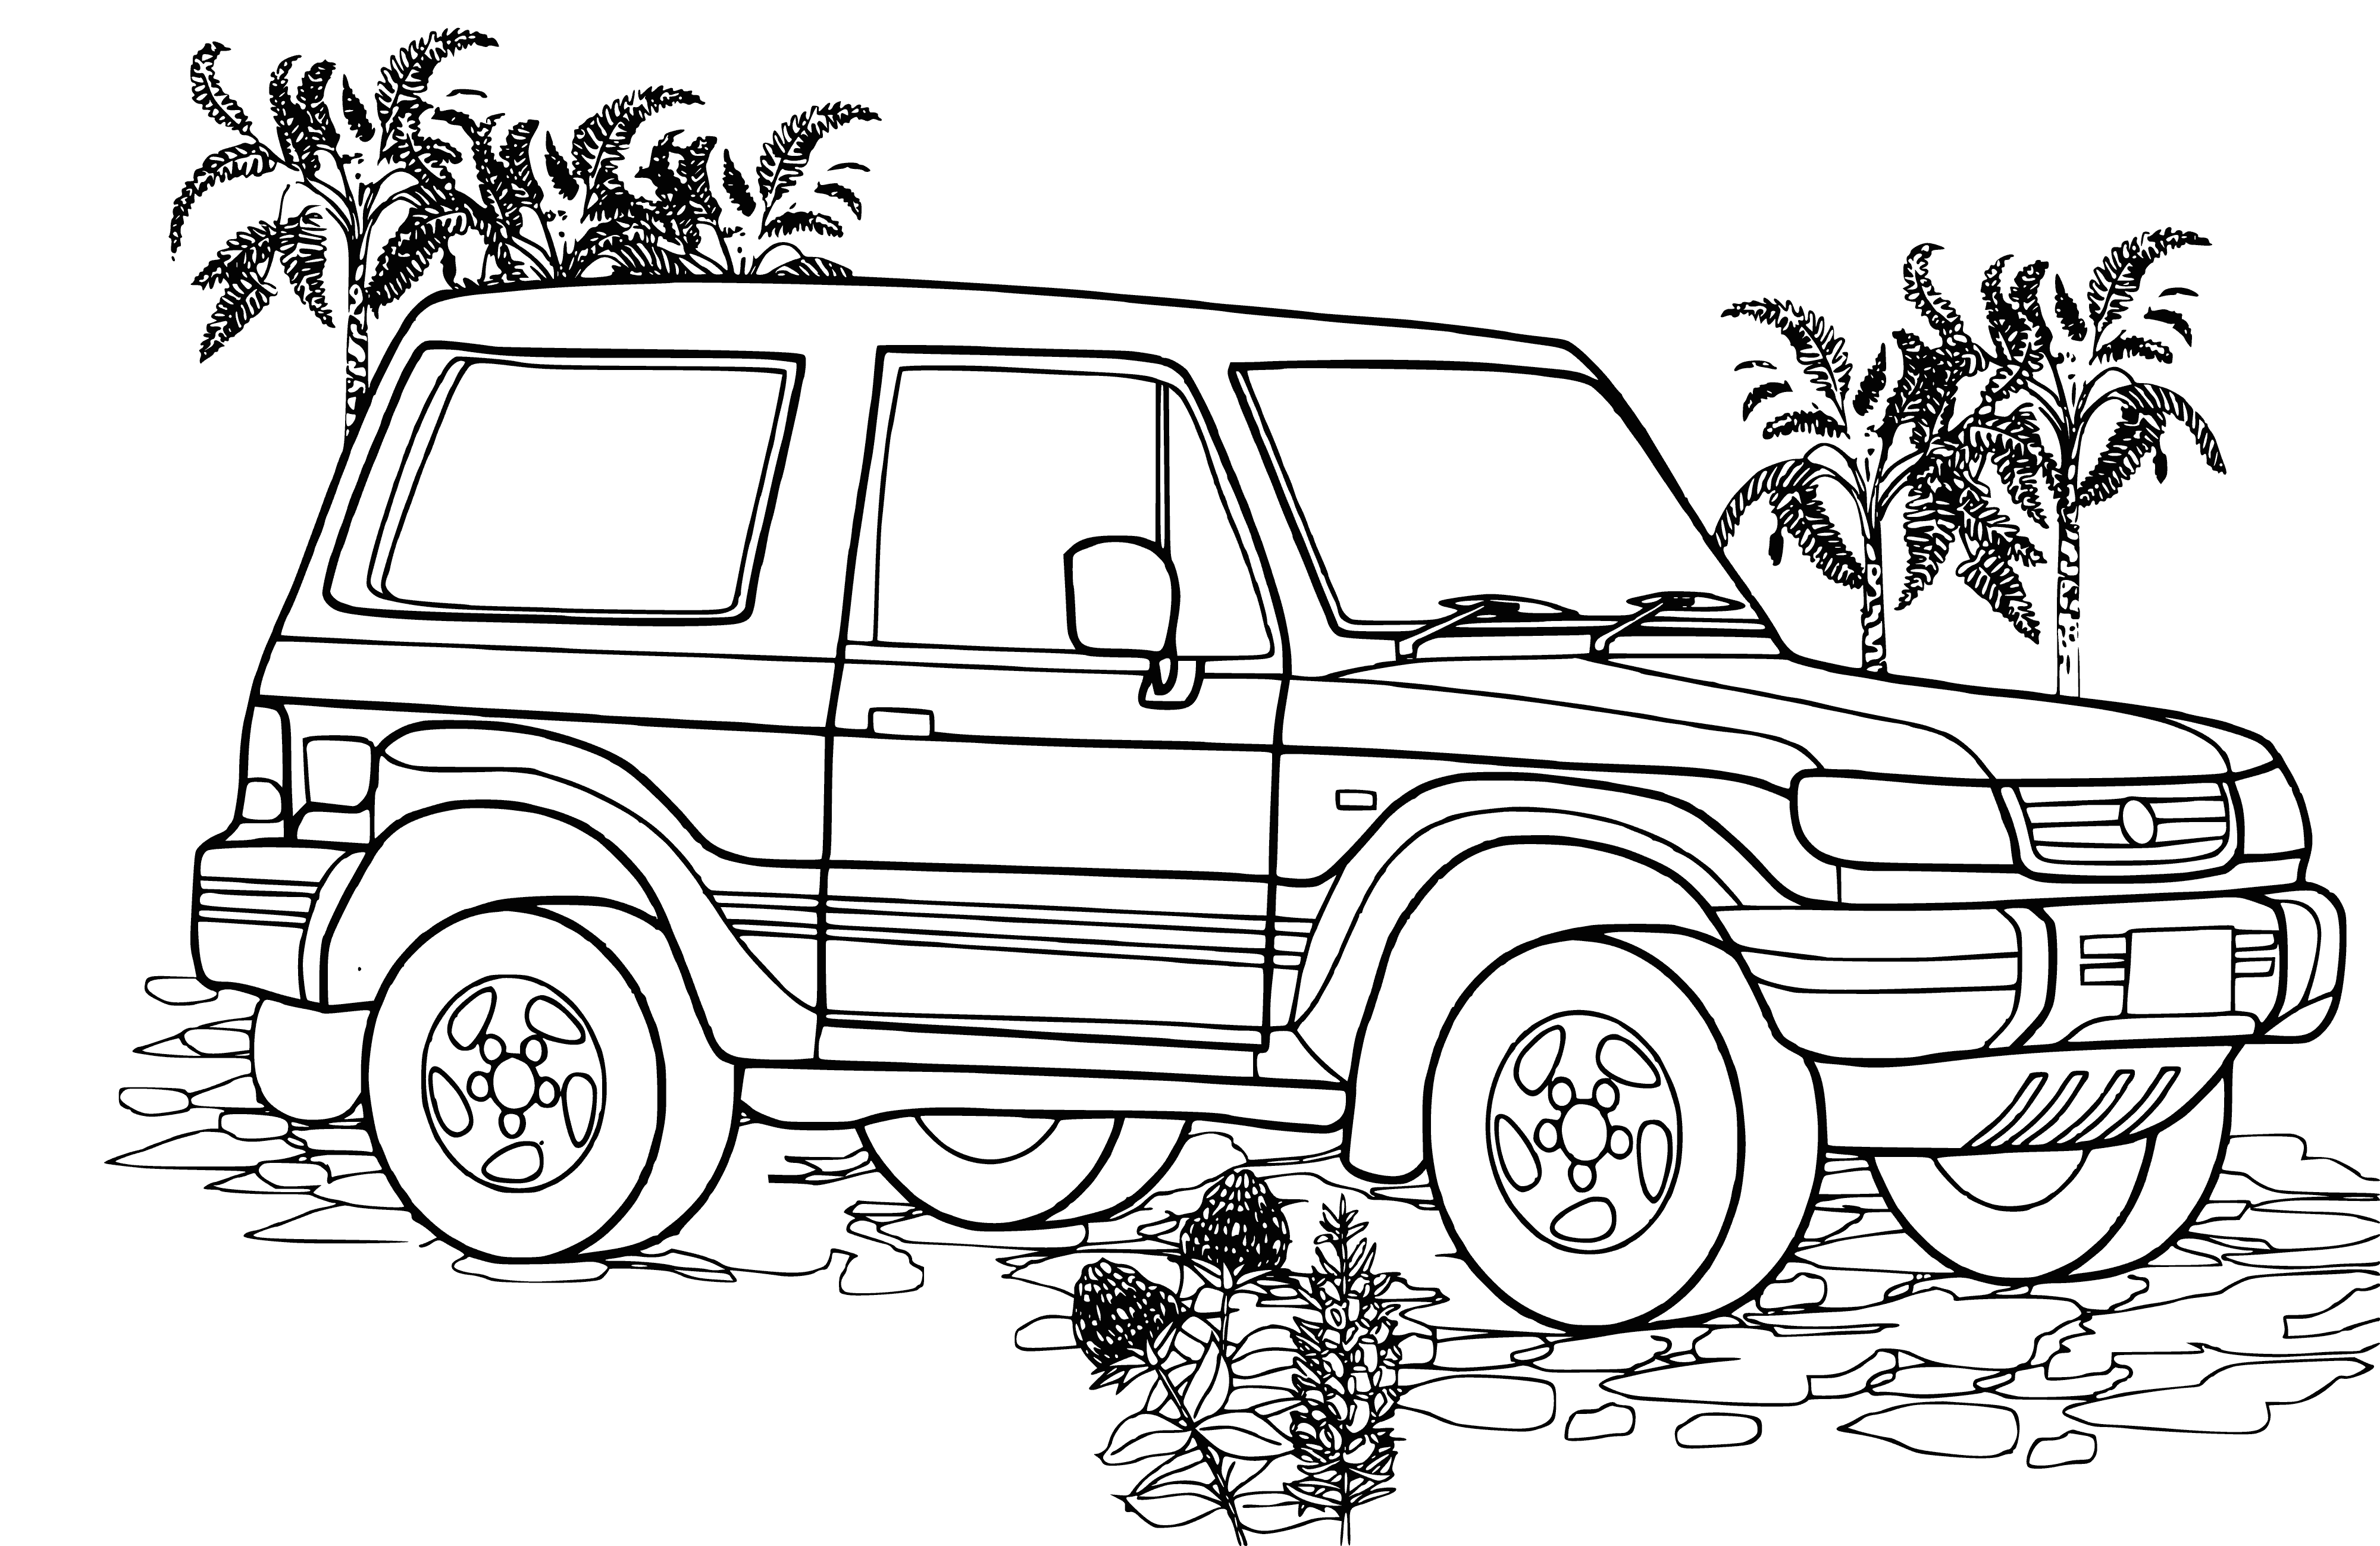 coloring page: Silver Hyundai Galloper SUV: large grille, blue accents, two rows of seats. "Hyundai Galloper" written on back.